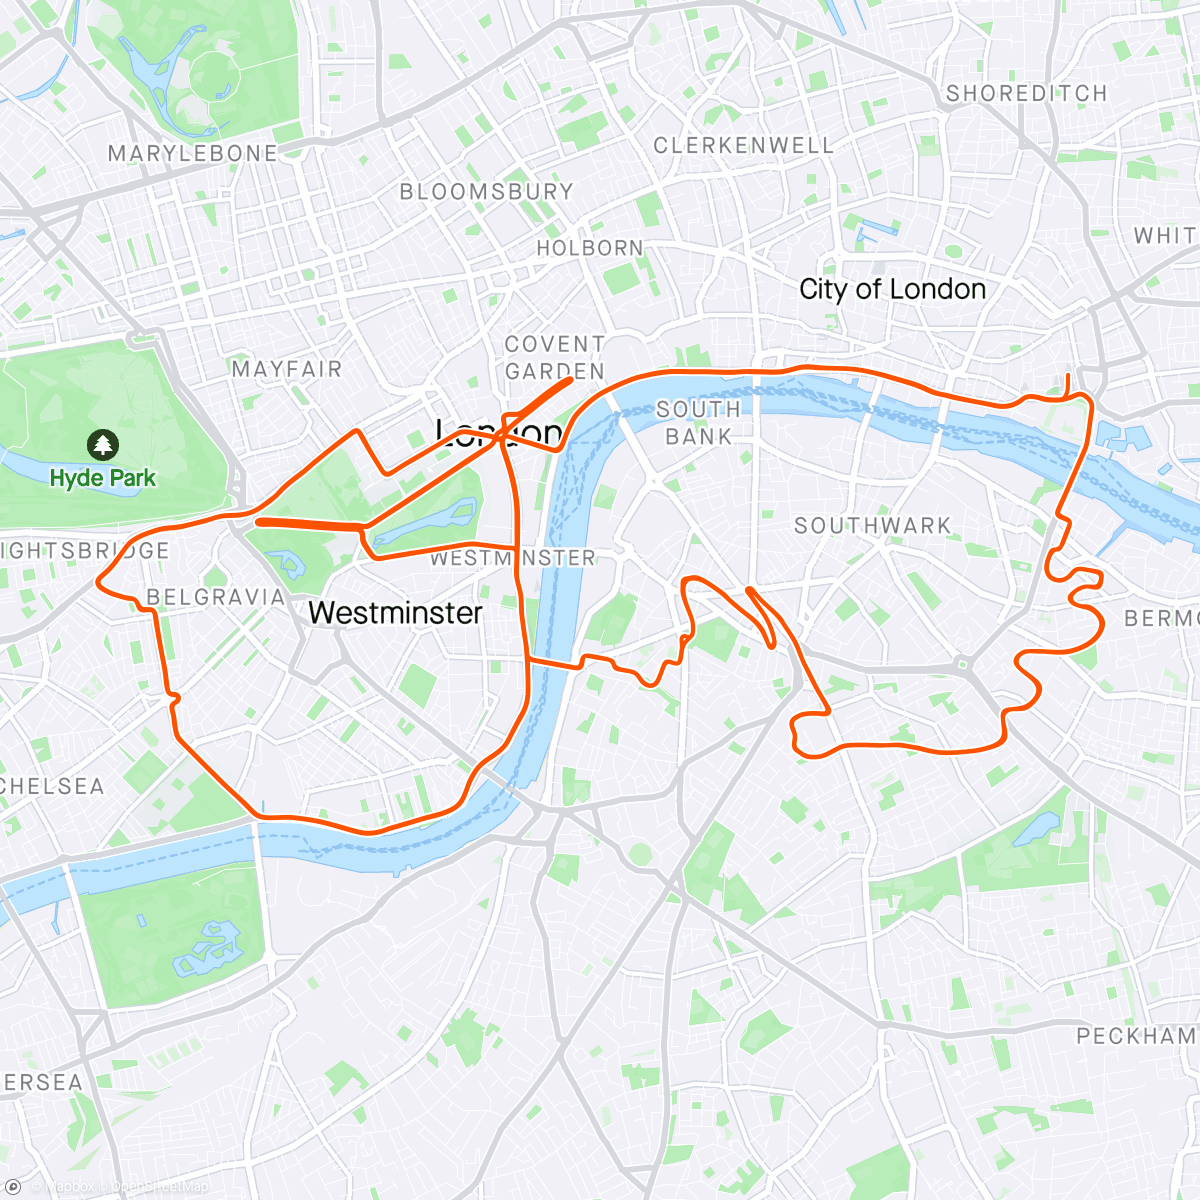 「Zwift - Group Ride: The Ride for Mental Health presented by Bear Mountaineers (D) on The London Pretzel in London」活動的地圖